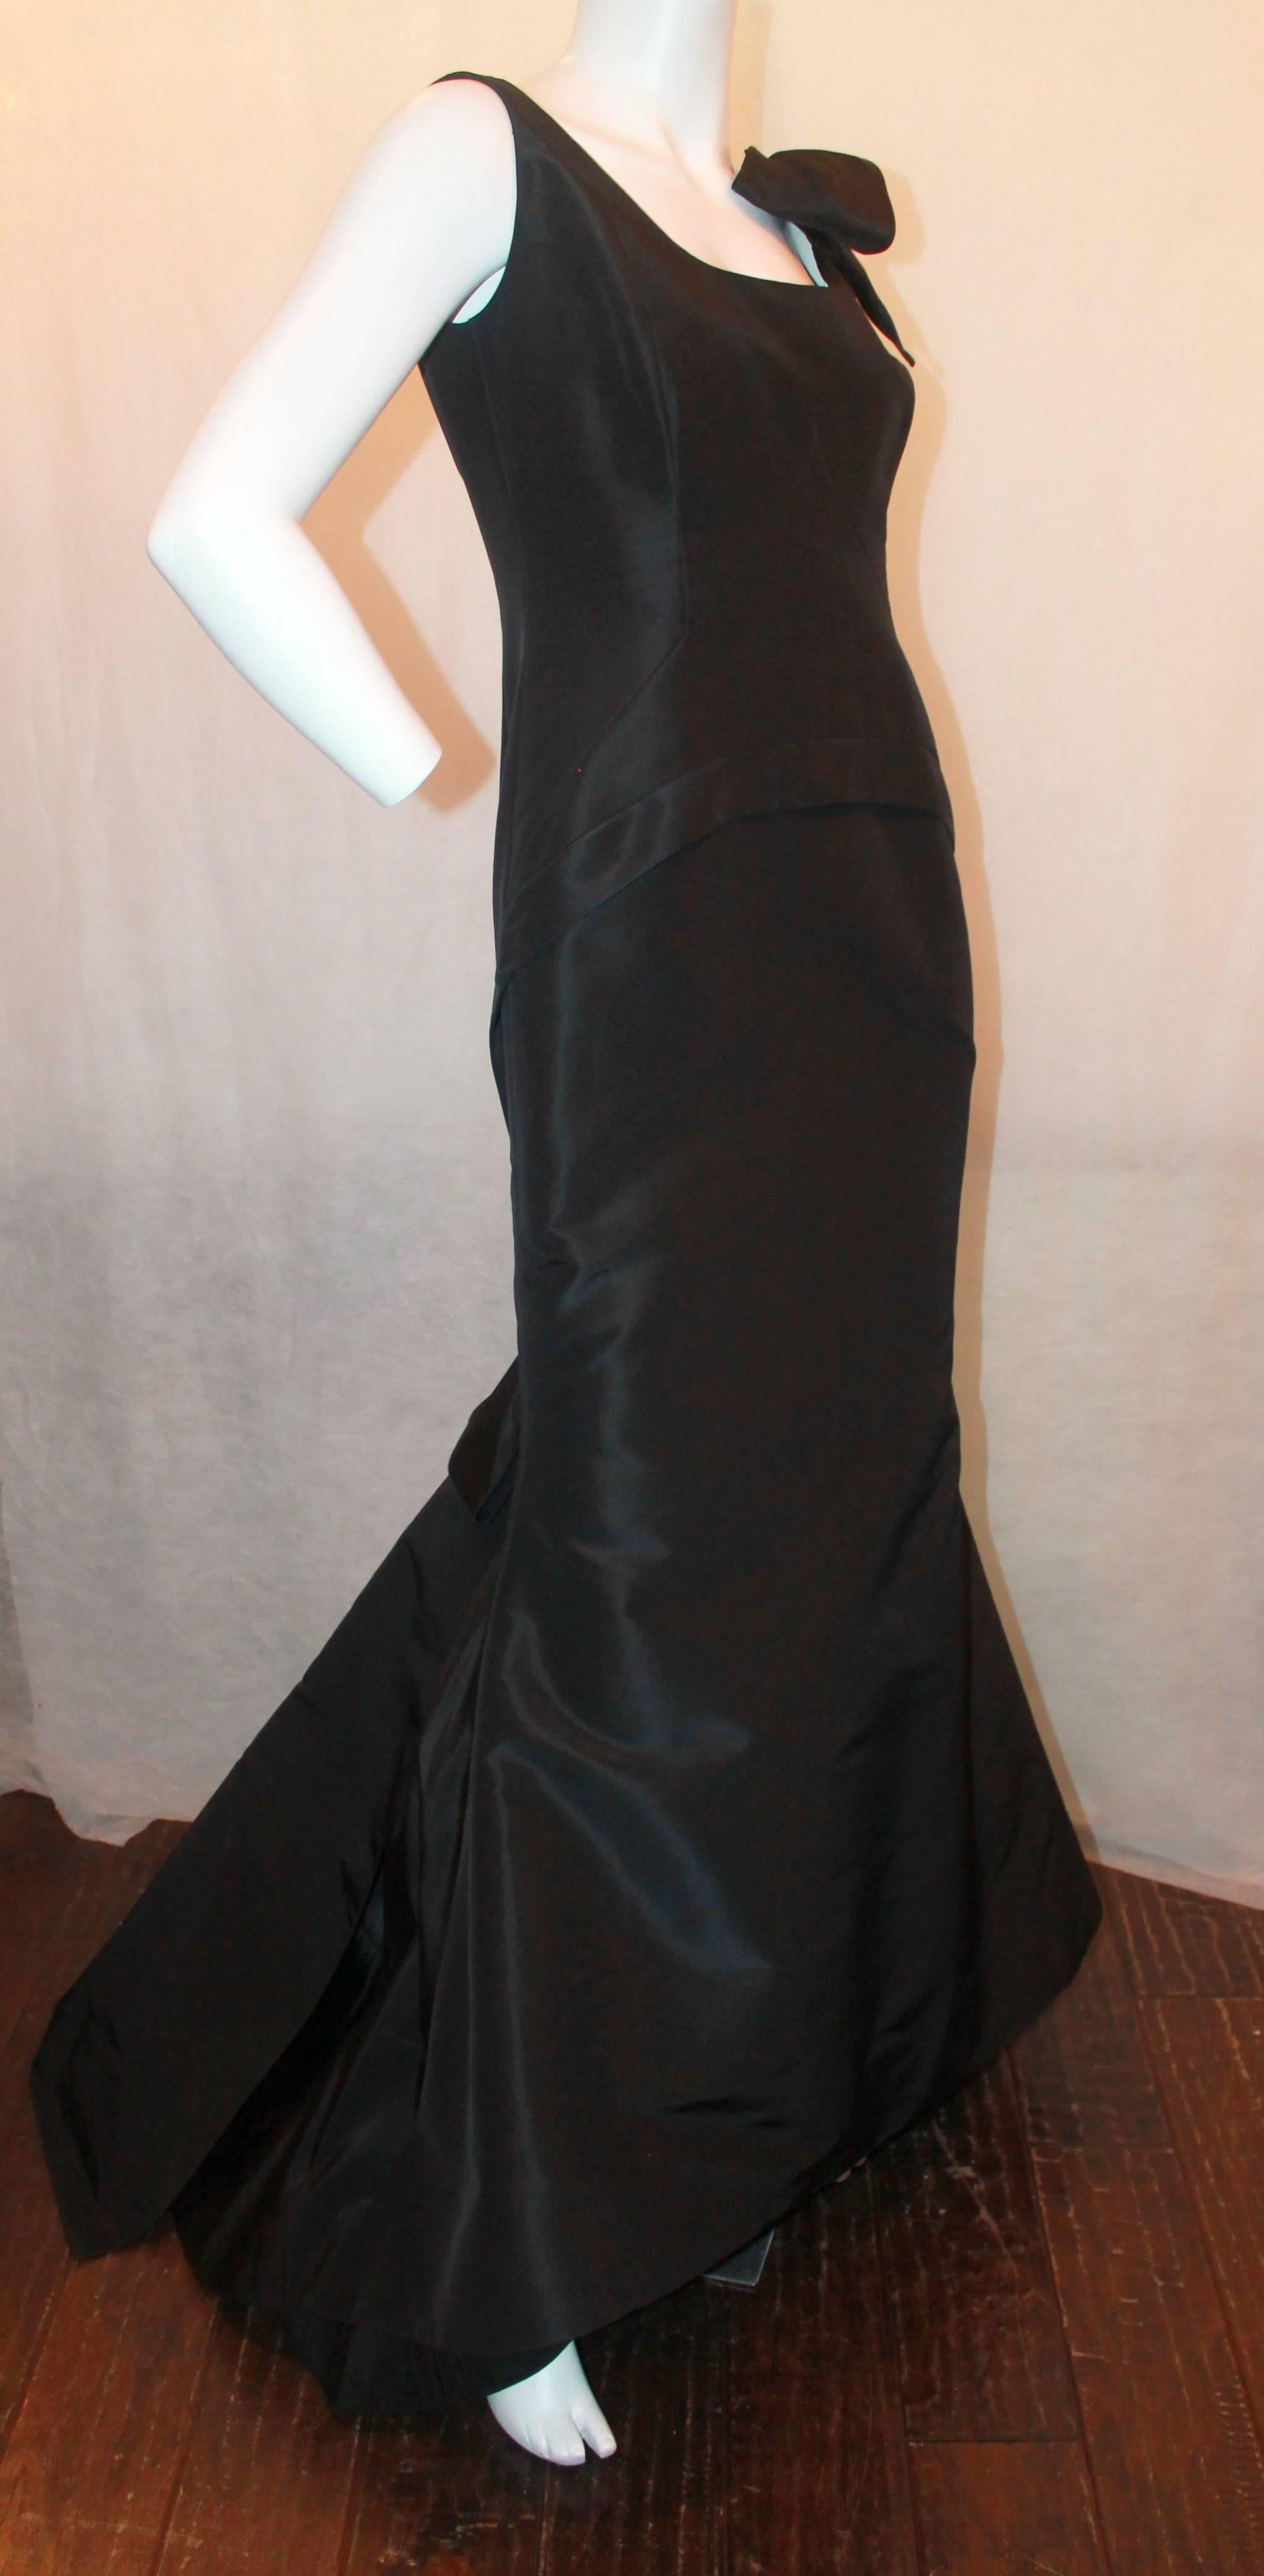 Oscar de la Renta Black Silk Taffeta Bustled Ball Gown - 8. This beautiful gown from 2012 is in excellent condition and is sleeveless with a bow on the left shoulder. It has a scoop neckline with a fitted torso and a bustled train in the back